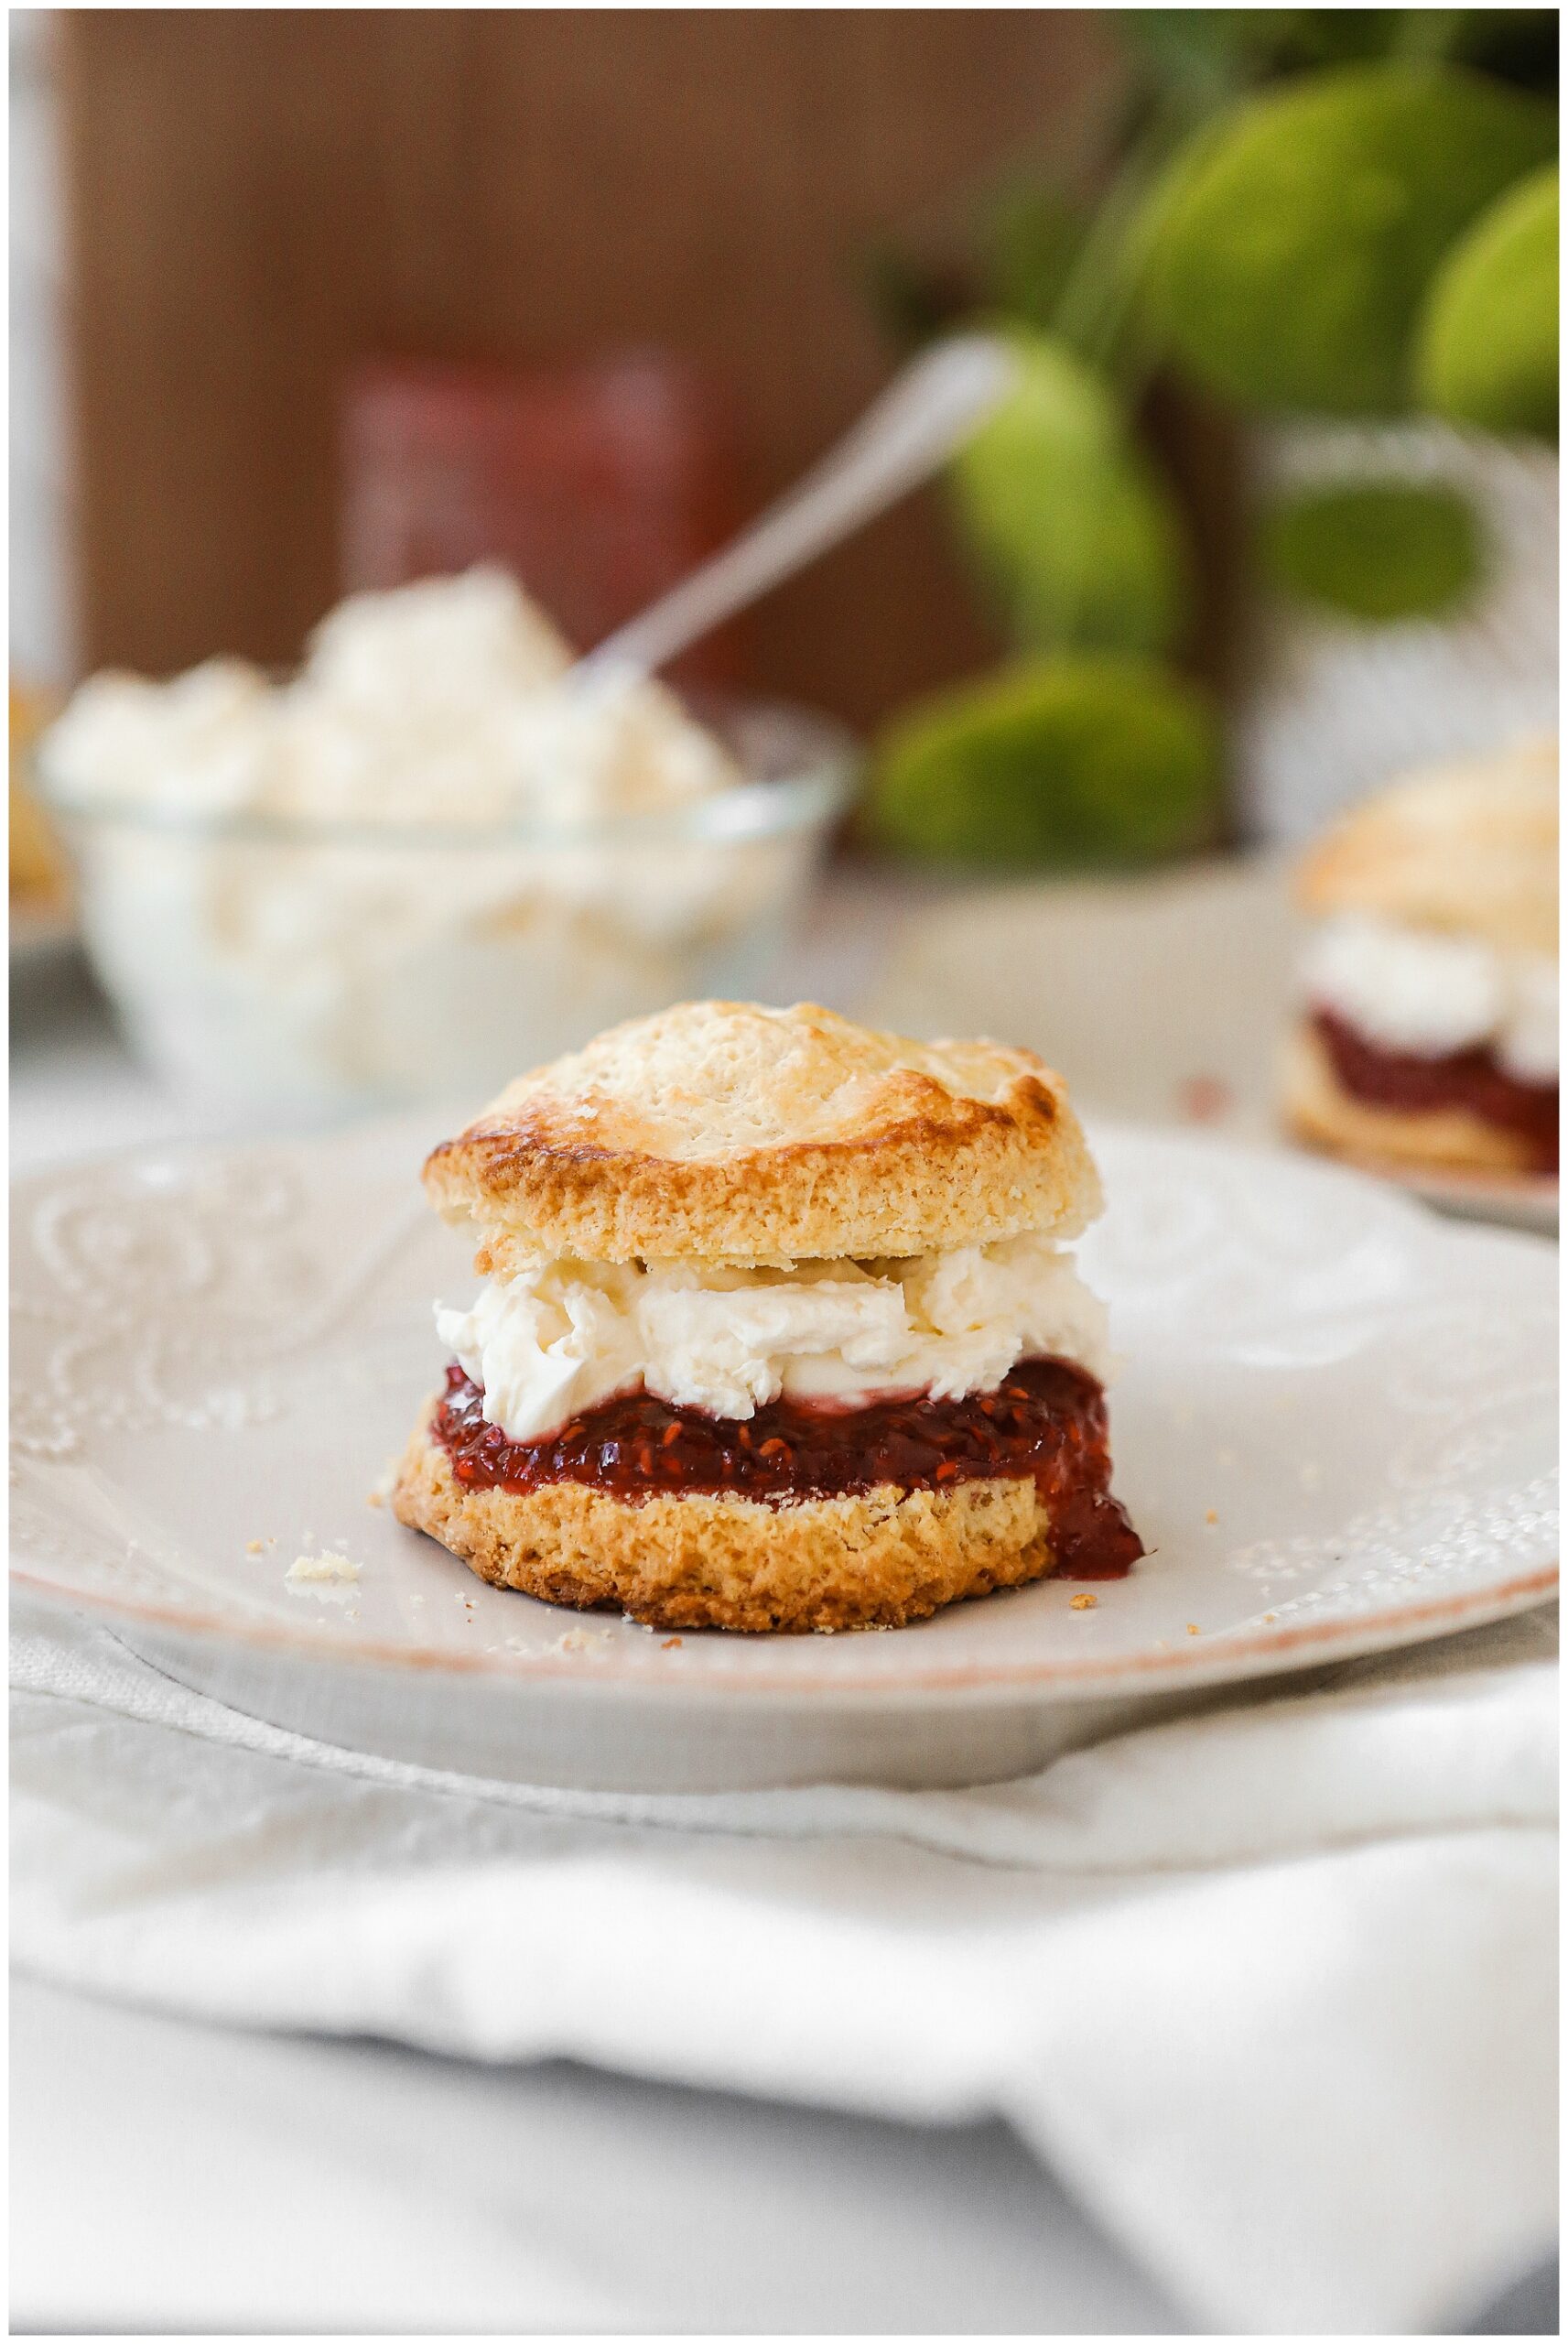 Scones with Jam and Clotted Cream